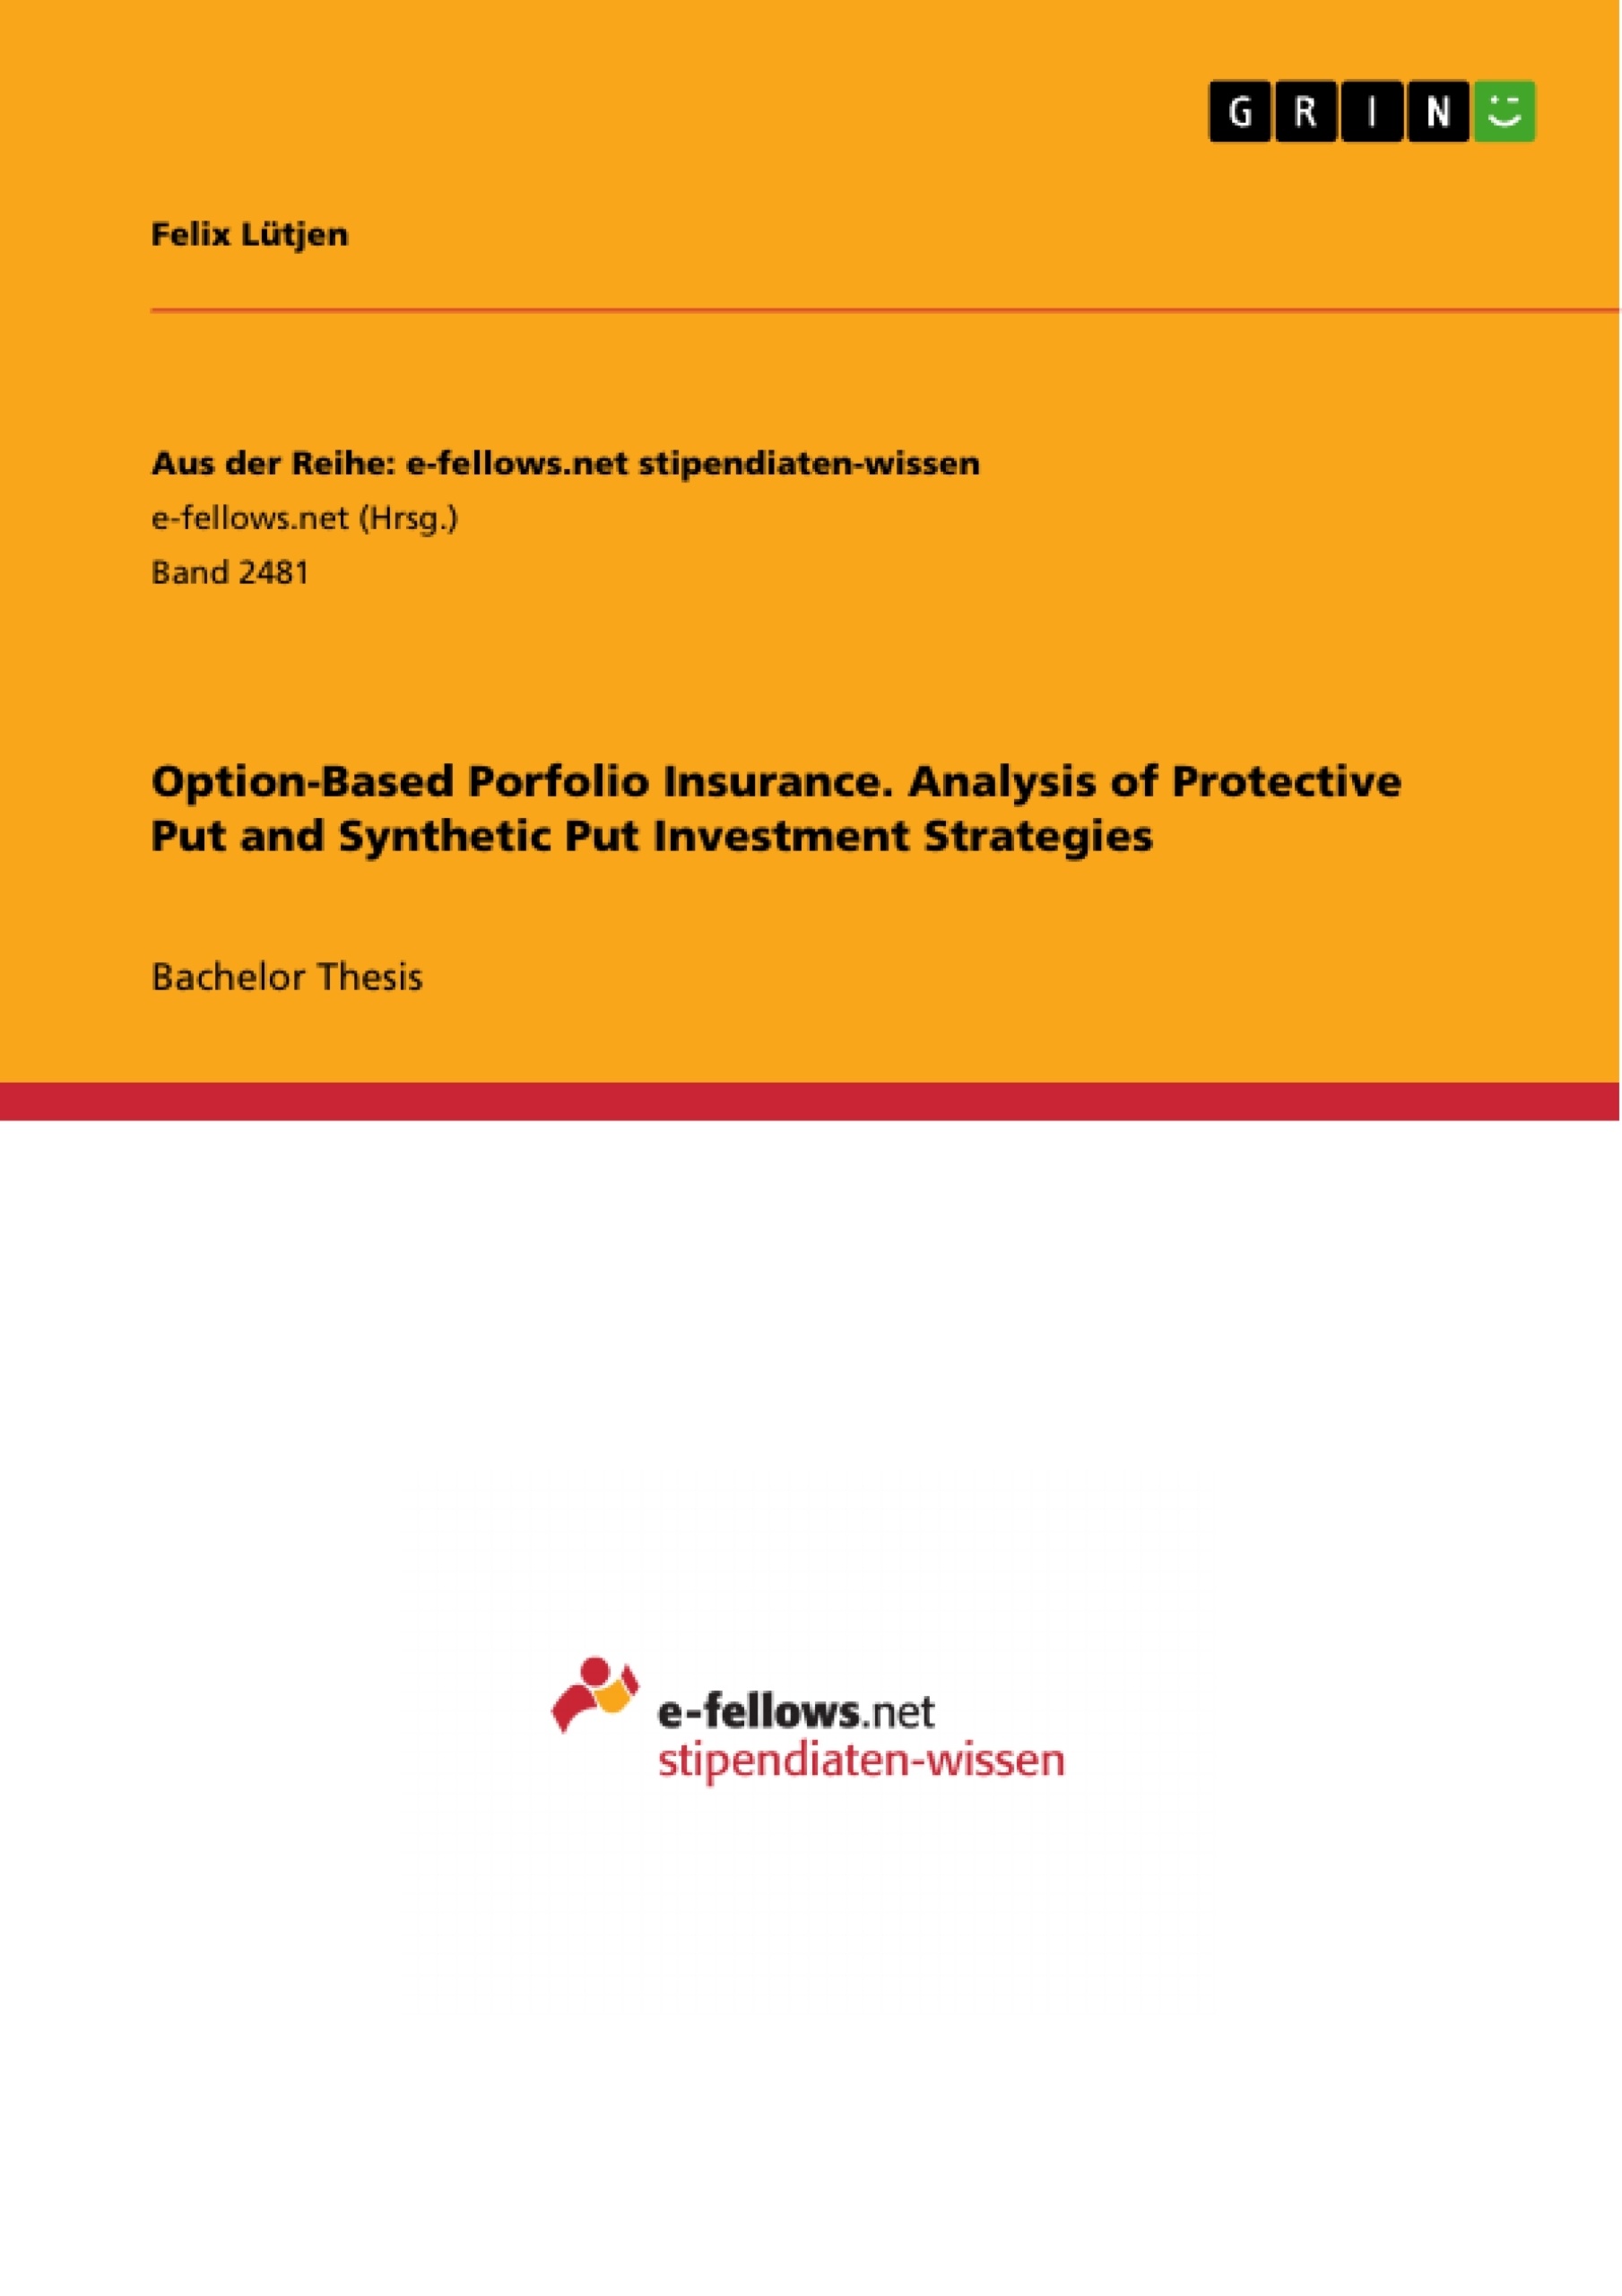 Title: Option-Based Porfolio Insurance. Analysis of Protective Put and Synthetic Put Investment Strategies